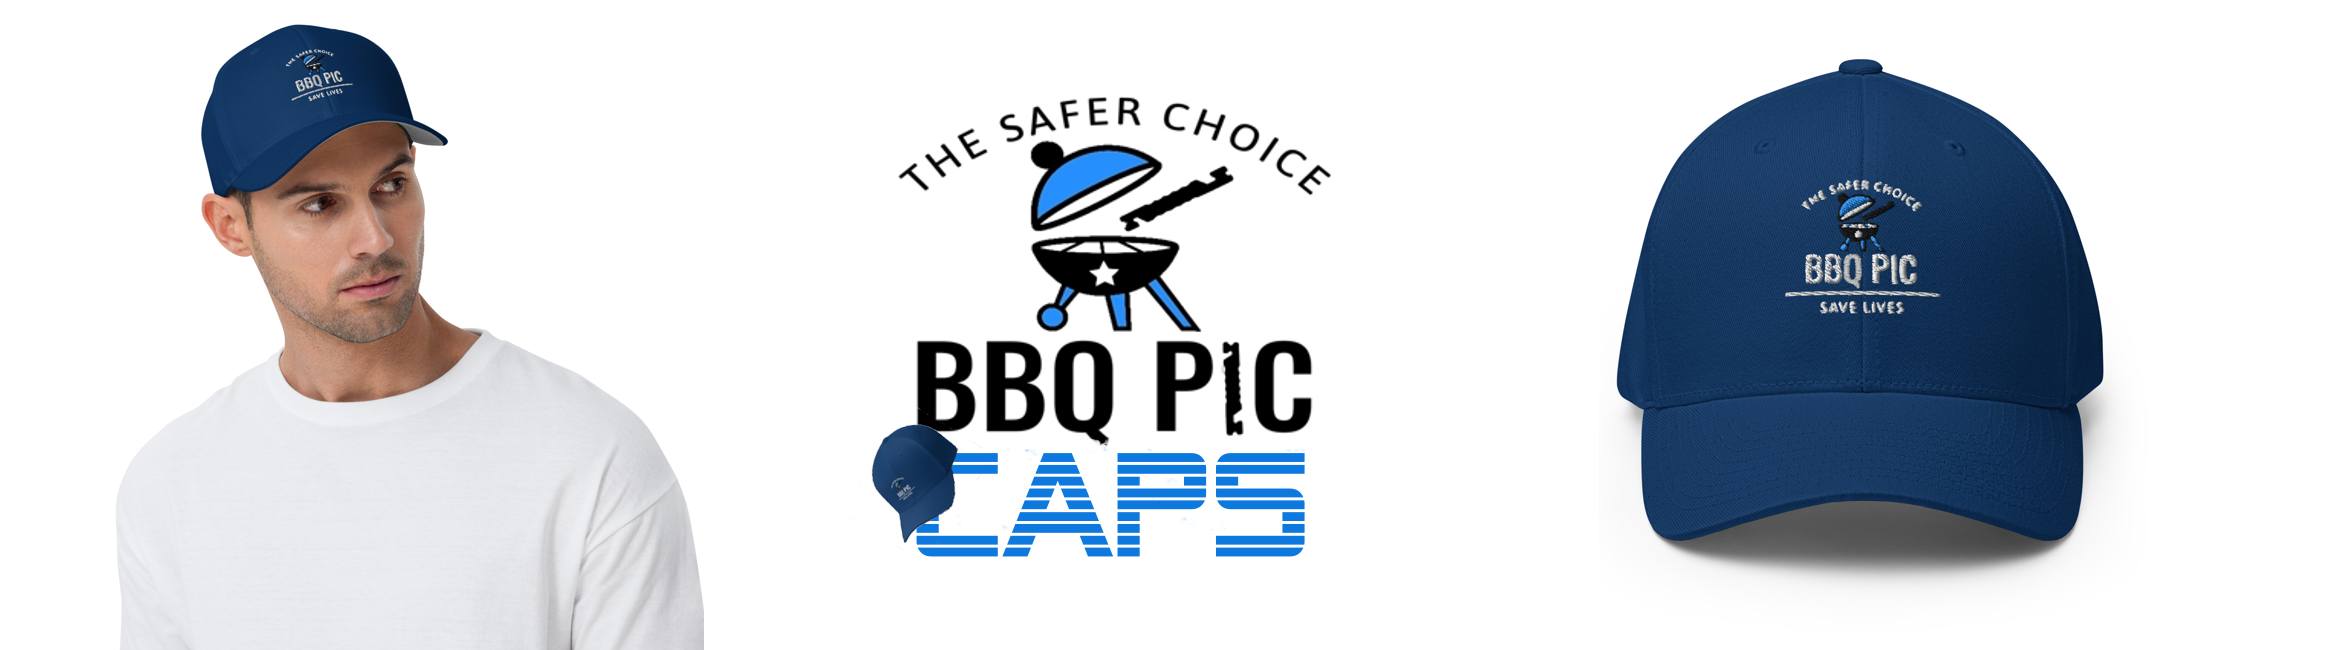 Become a knight of BBQ for being a proud owner of the Excalibur quality BBQ Scraper the BBQ Pic and buy this stylish BBQ Pic baseball cap.